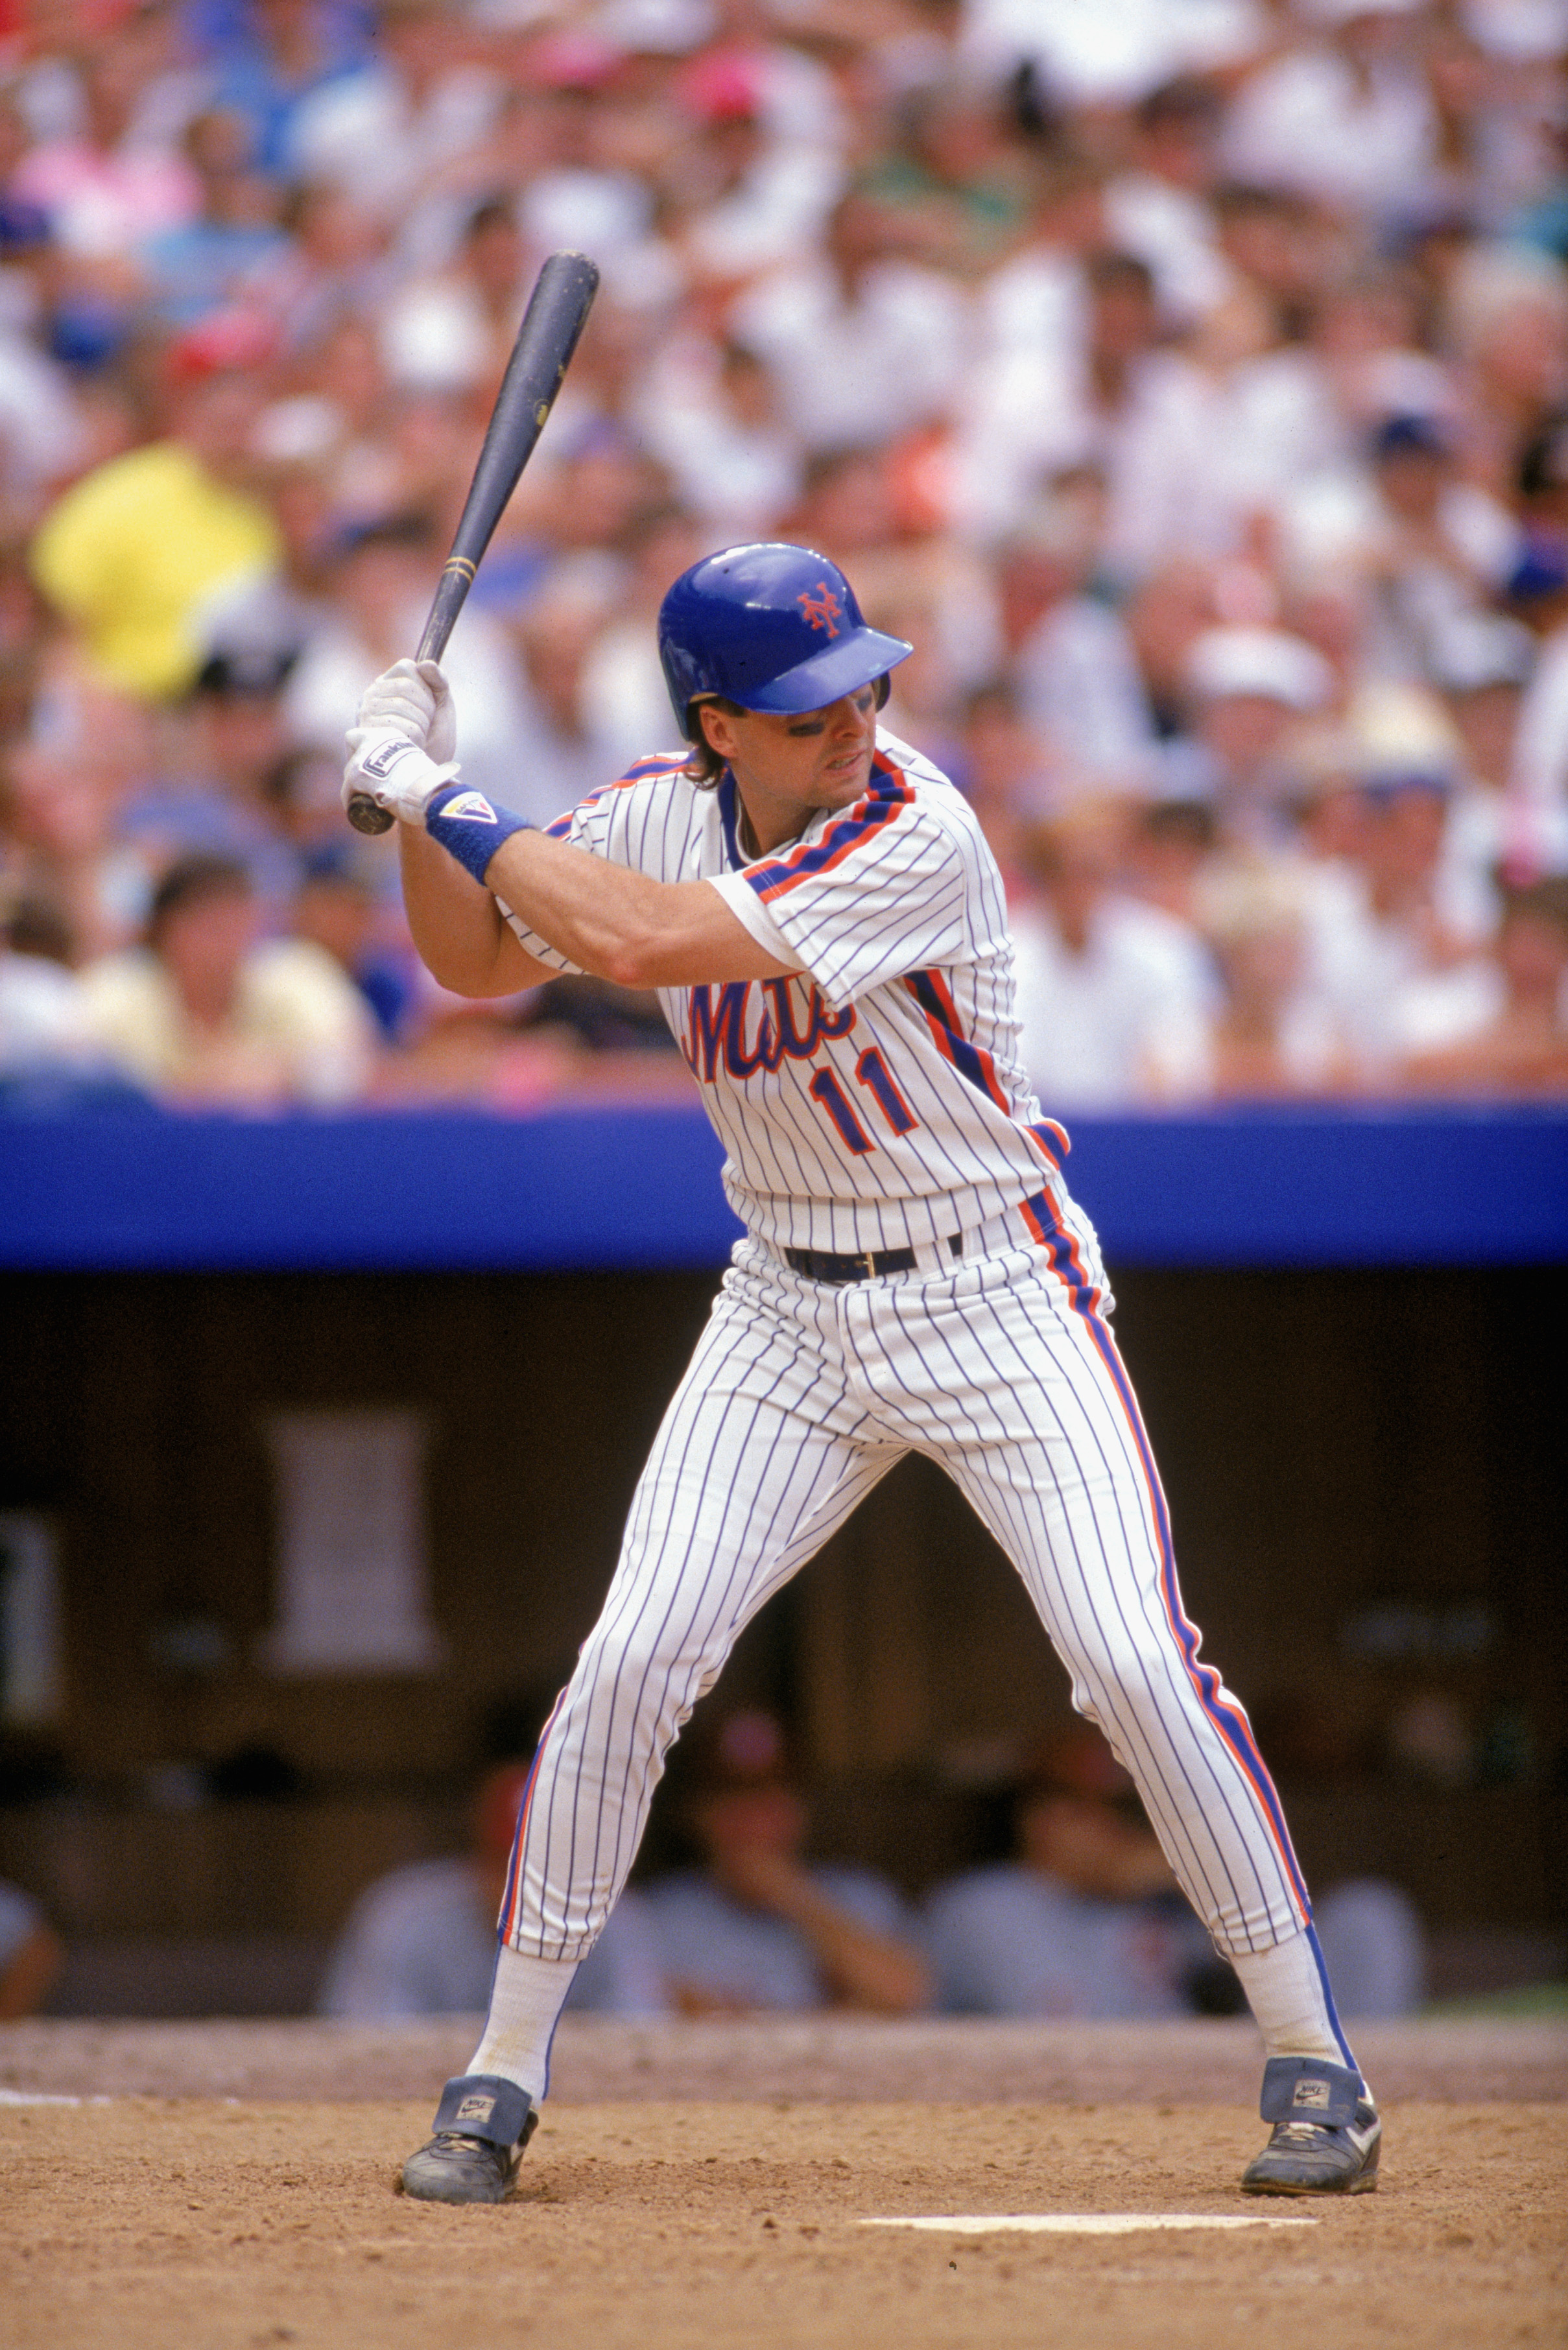 1990:  Tim Teufel of the New York Mets stands ready at bat during a game in the 1990 season. ( Photo by: Scott Halleran/Getty Images)